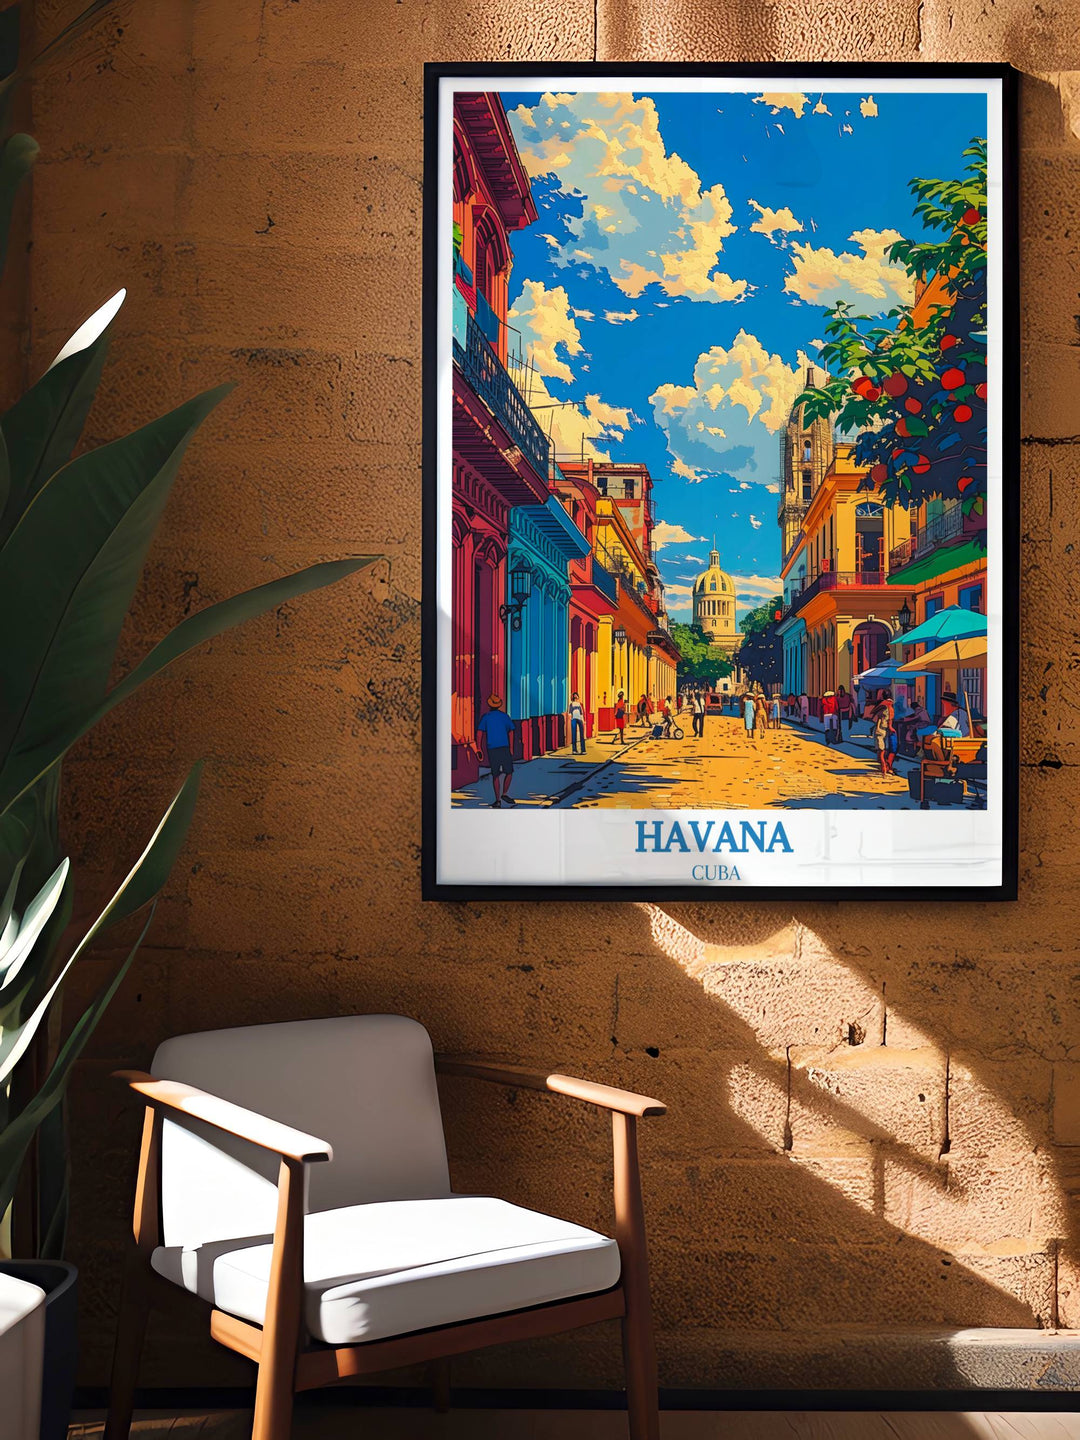 A Havana Art Print focusing on the artistic graffiti and street art that adorn the walls of Habana Vieja, showcasing the creative energy and dynamic street culture that thrives in the heart of Havana.